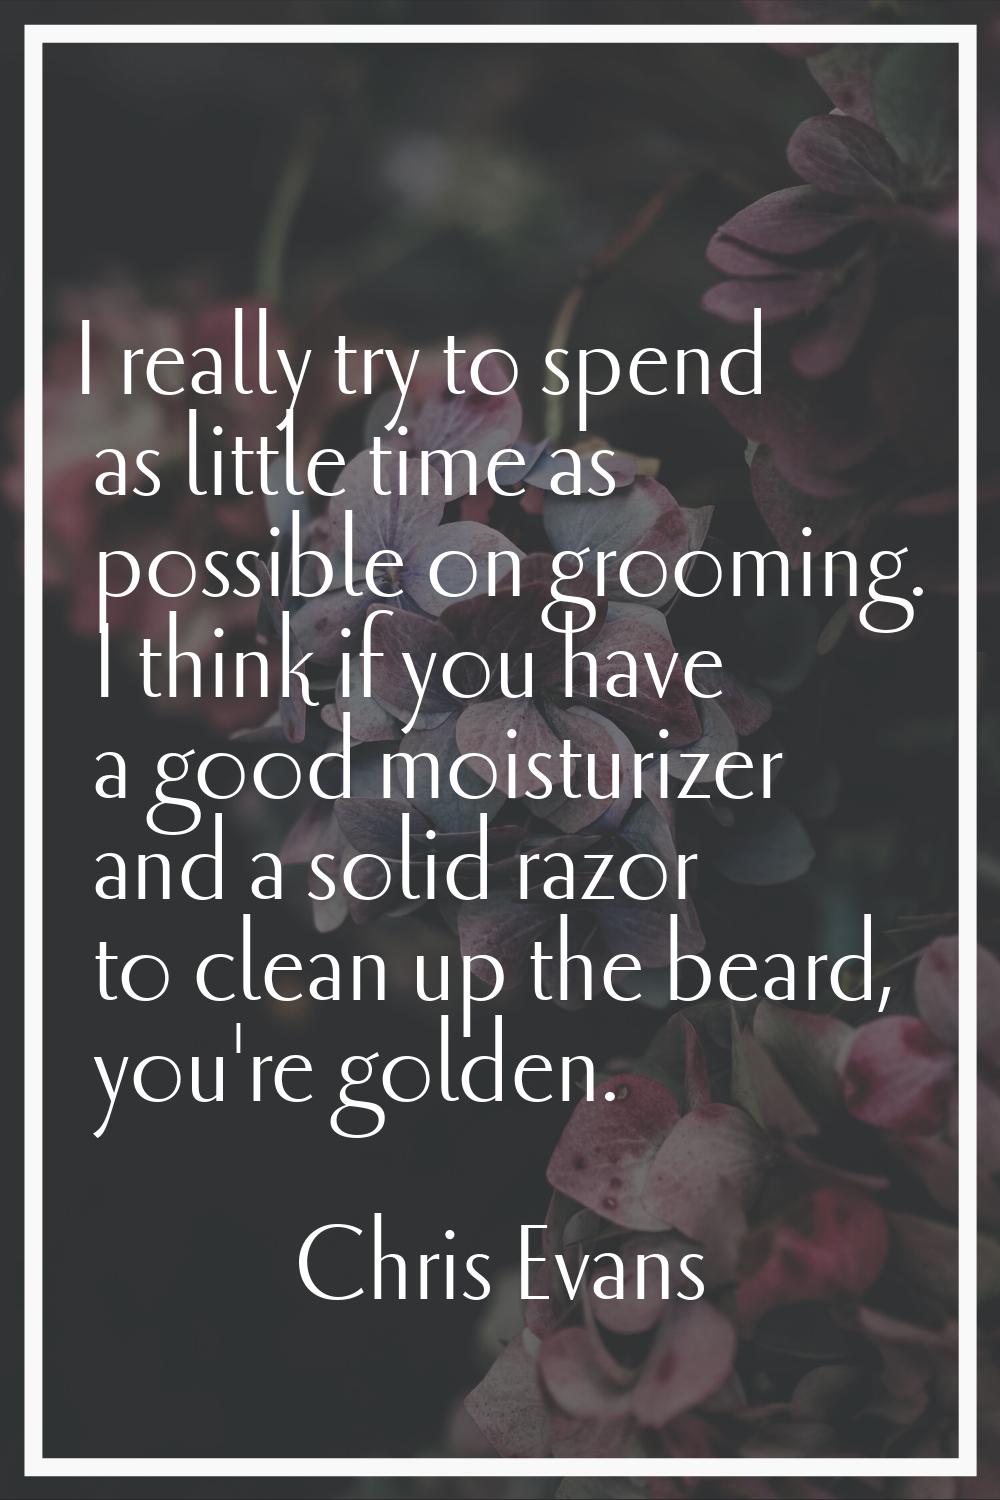 I really try to spend as little time as possible on grooming. I think if you have a good moisturize